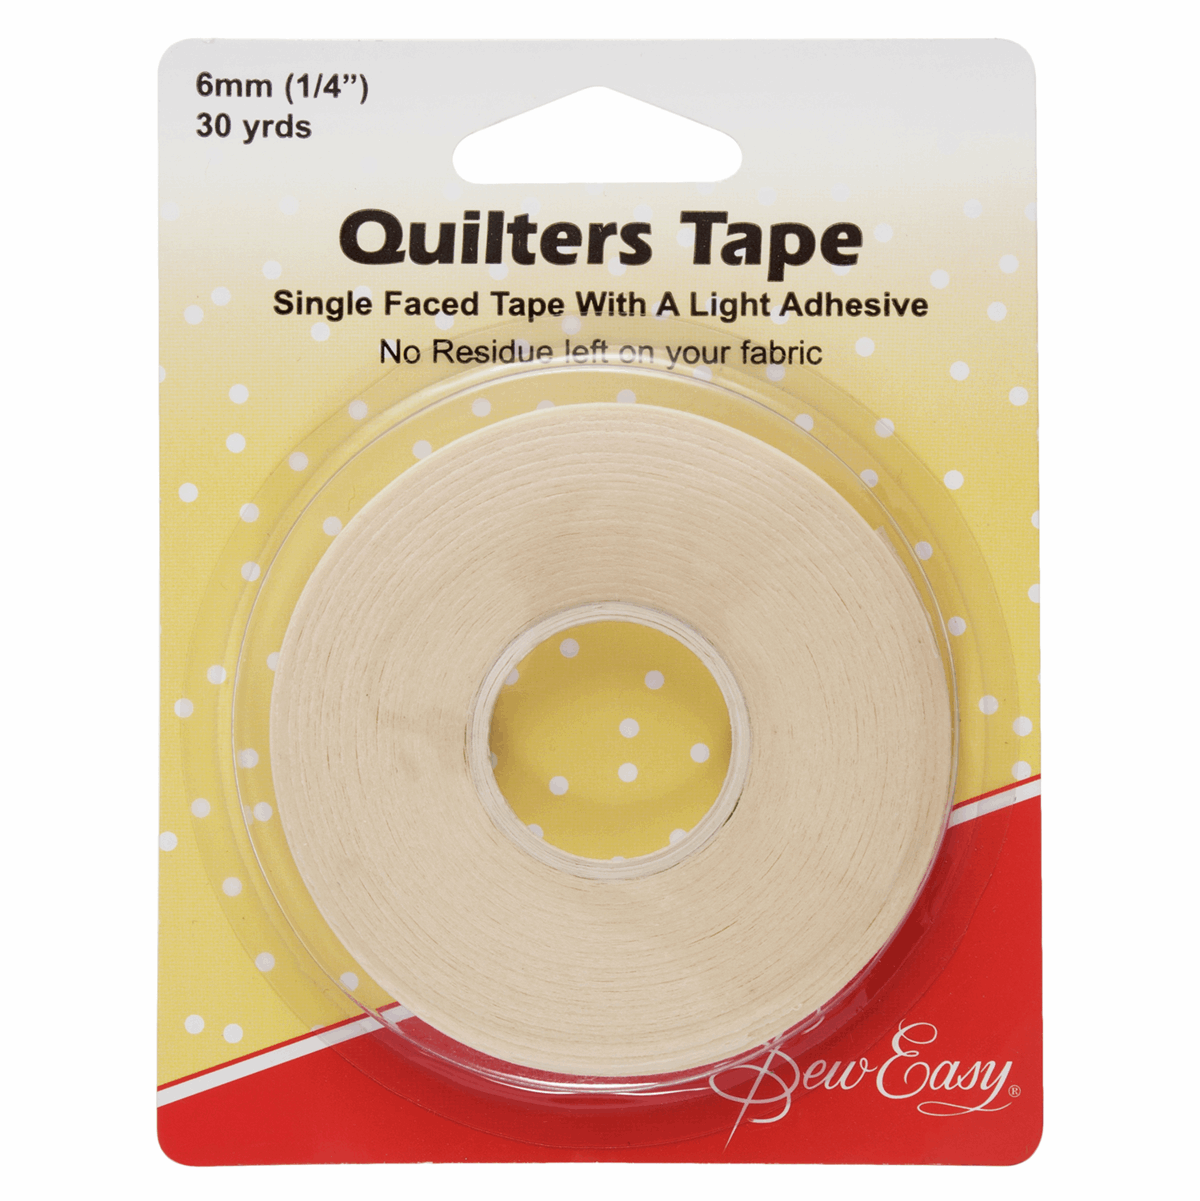 Quilters Tape 6mm - Sew Easy